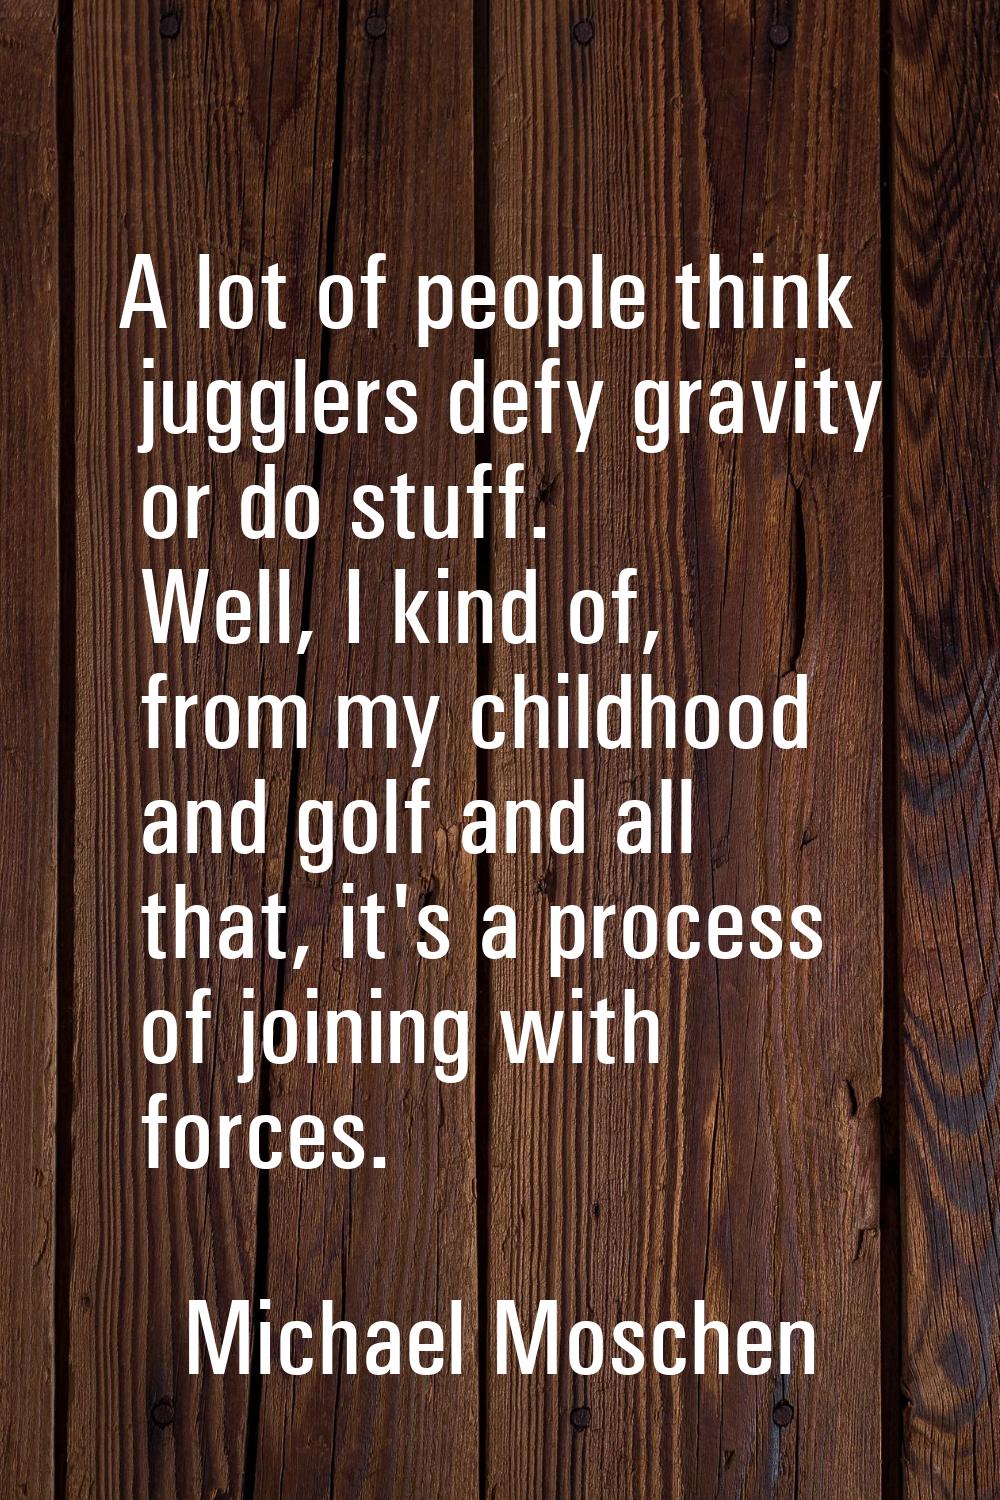 A lot of people think jugglers defy gravity or do stuff. Well, I kind of, from my childhood and gol